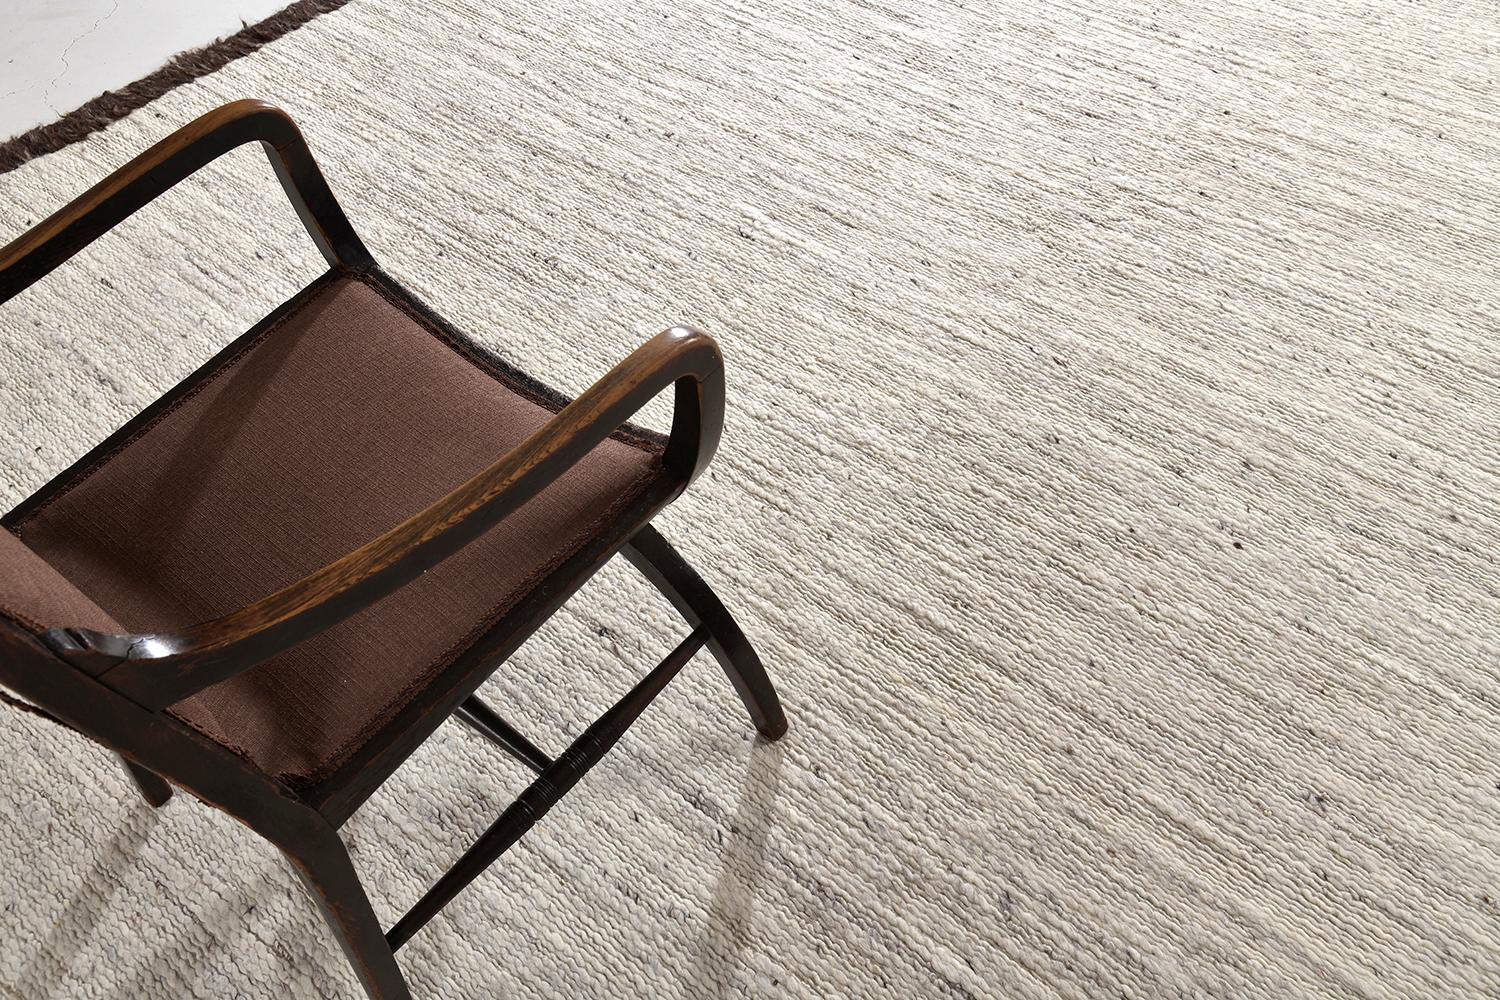 'Caleta' is a beautiful handwoven speckled ivory flat-weave, bordered with rich brown shag. A simple yet interesting design, 'Caleta' is a luxurious and timely design that will elevate any space. Mehraban's Sabbia collection is unique for its play